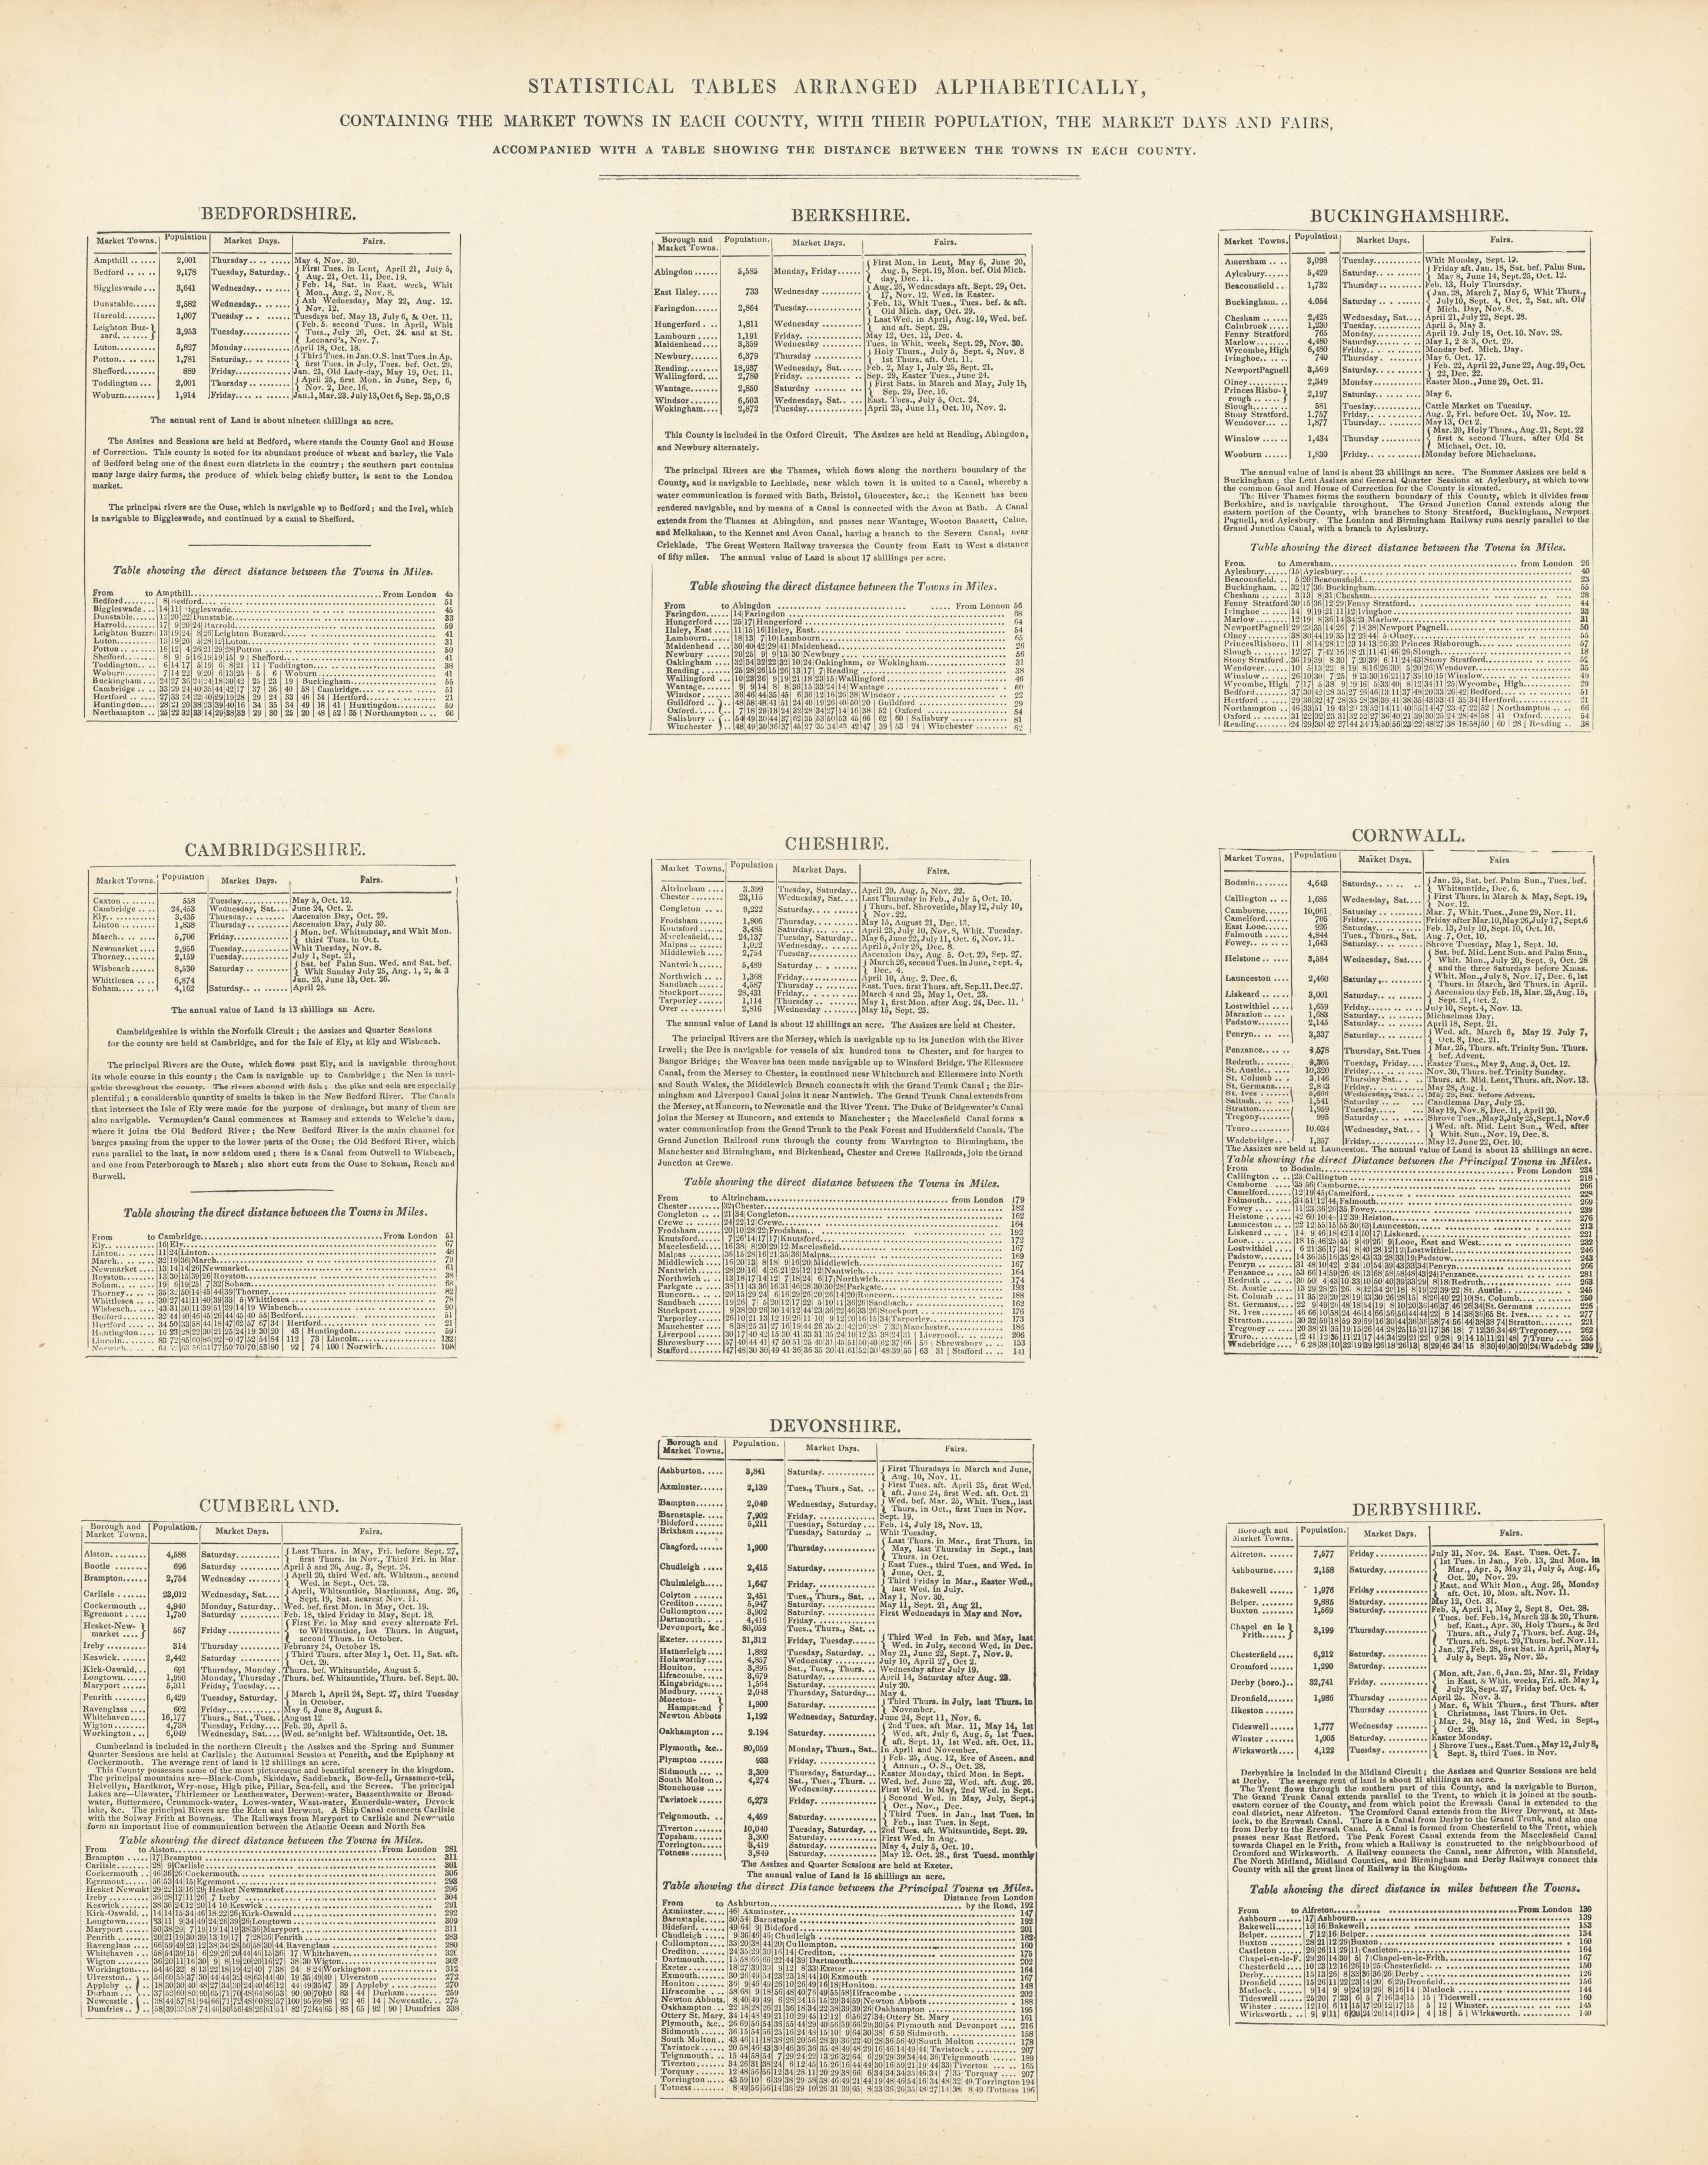 Associate Product Market Towns, days, fairs & population by county. Bedfordshire-Derbyshire 1870